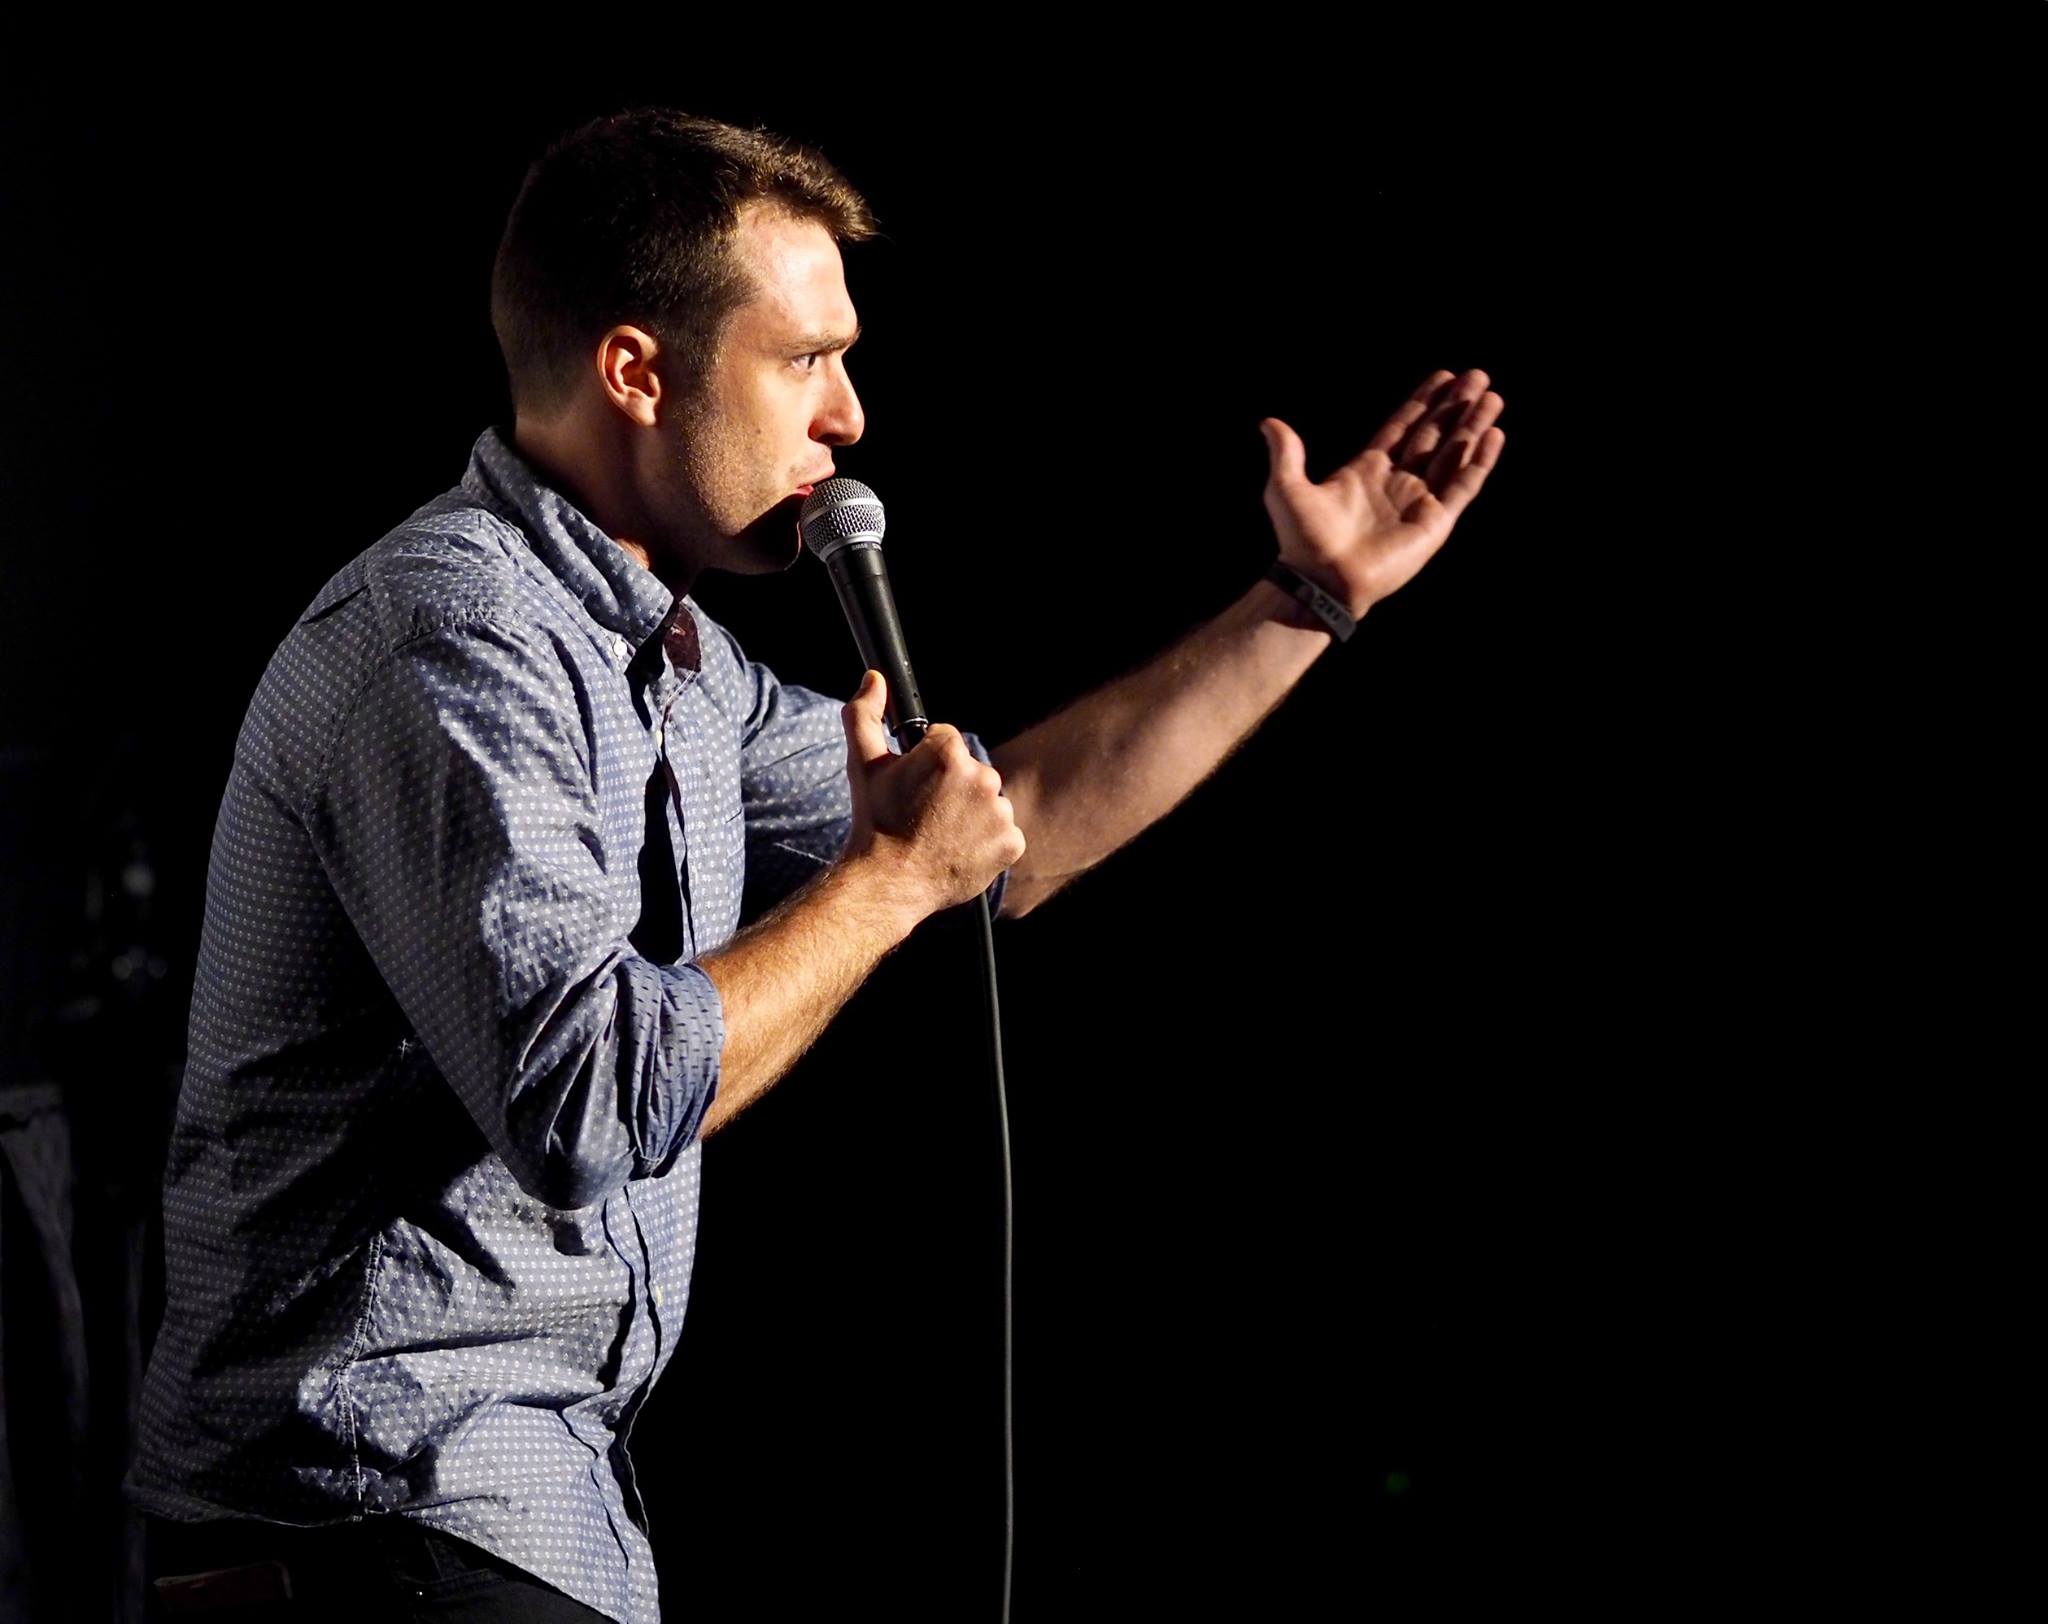 NYC Comedy Invades Newark at QXT's Night Club Featuring JORDAN RAYBOULD (New York Comedy Festival), BRET RAYBOULD (Bridgetown Comedy Festival), WILL POZNAN (Questionable Taste Podcast)